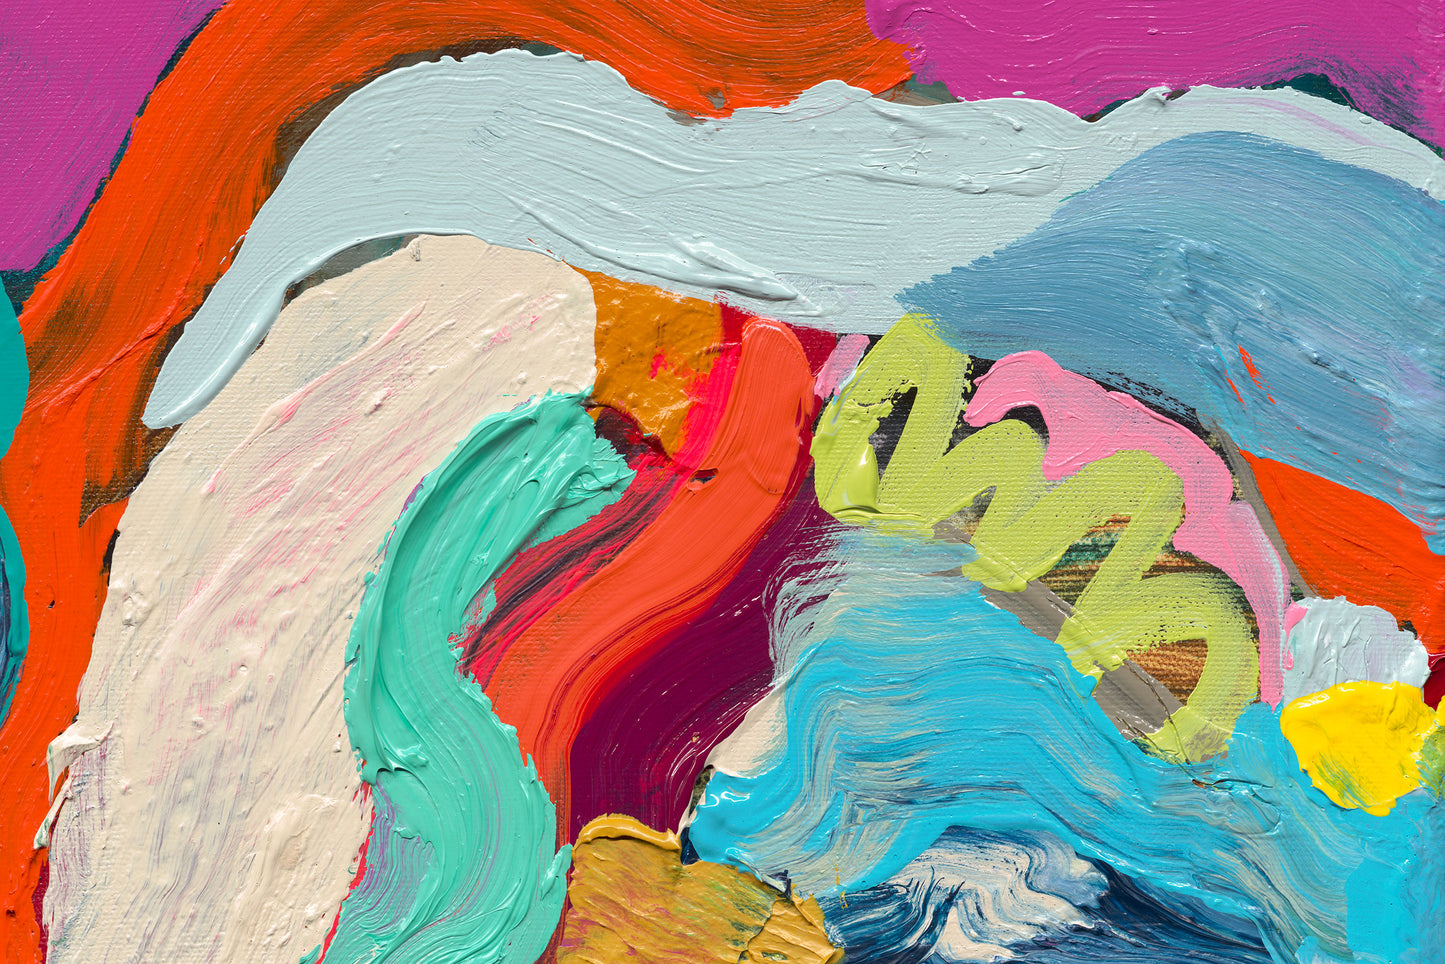 Detail image of texture of the abstract painting No Such Thing As Luck by Canadian artist, Claire Desjardins.